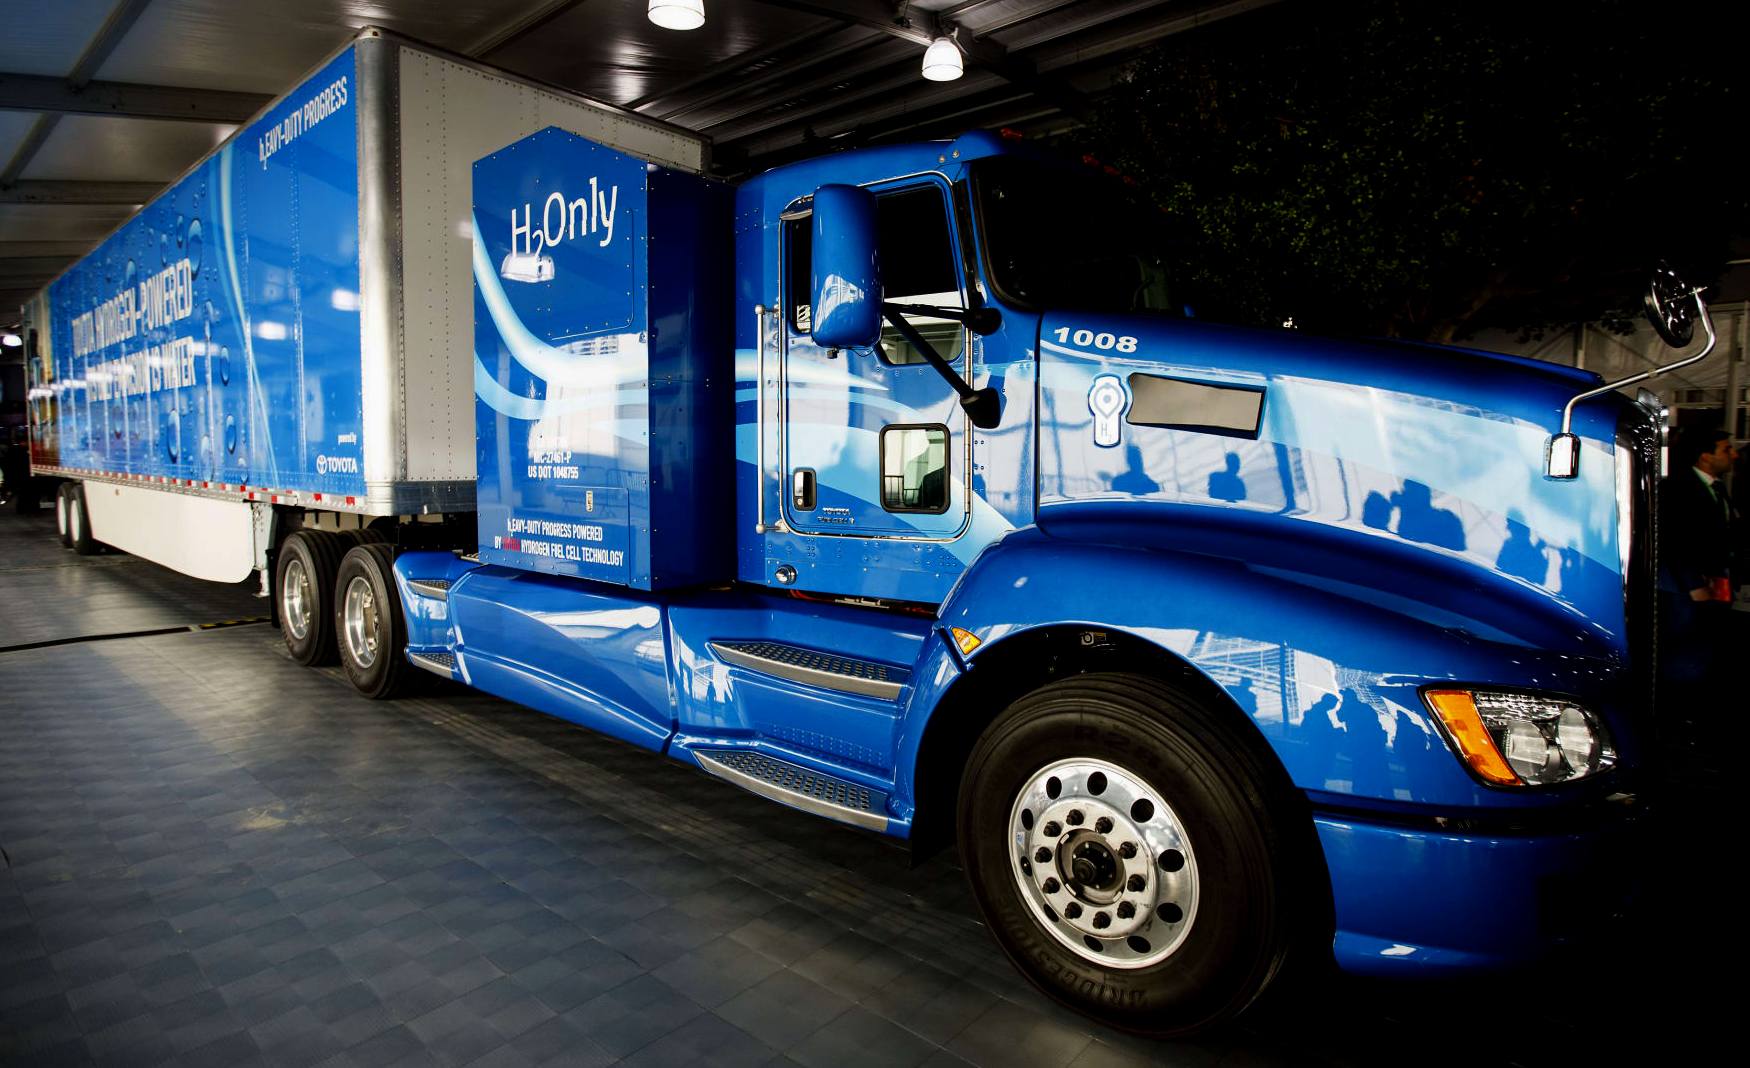 Toyota hydrogen fuel cell powered truck